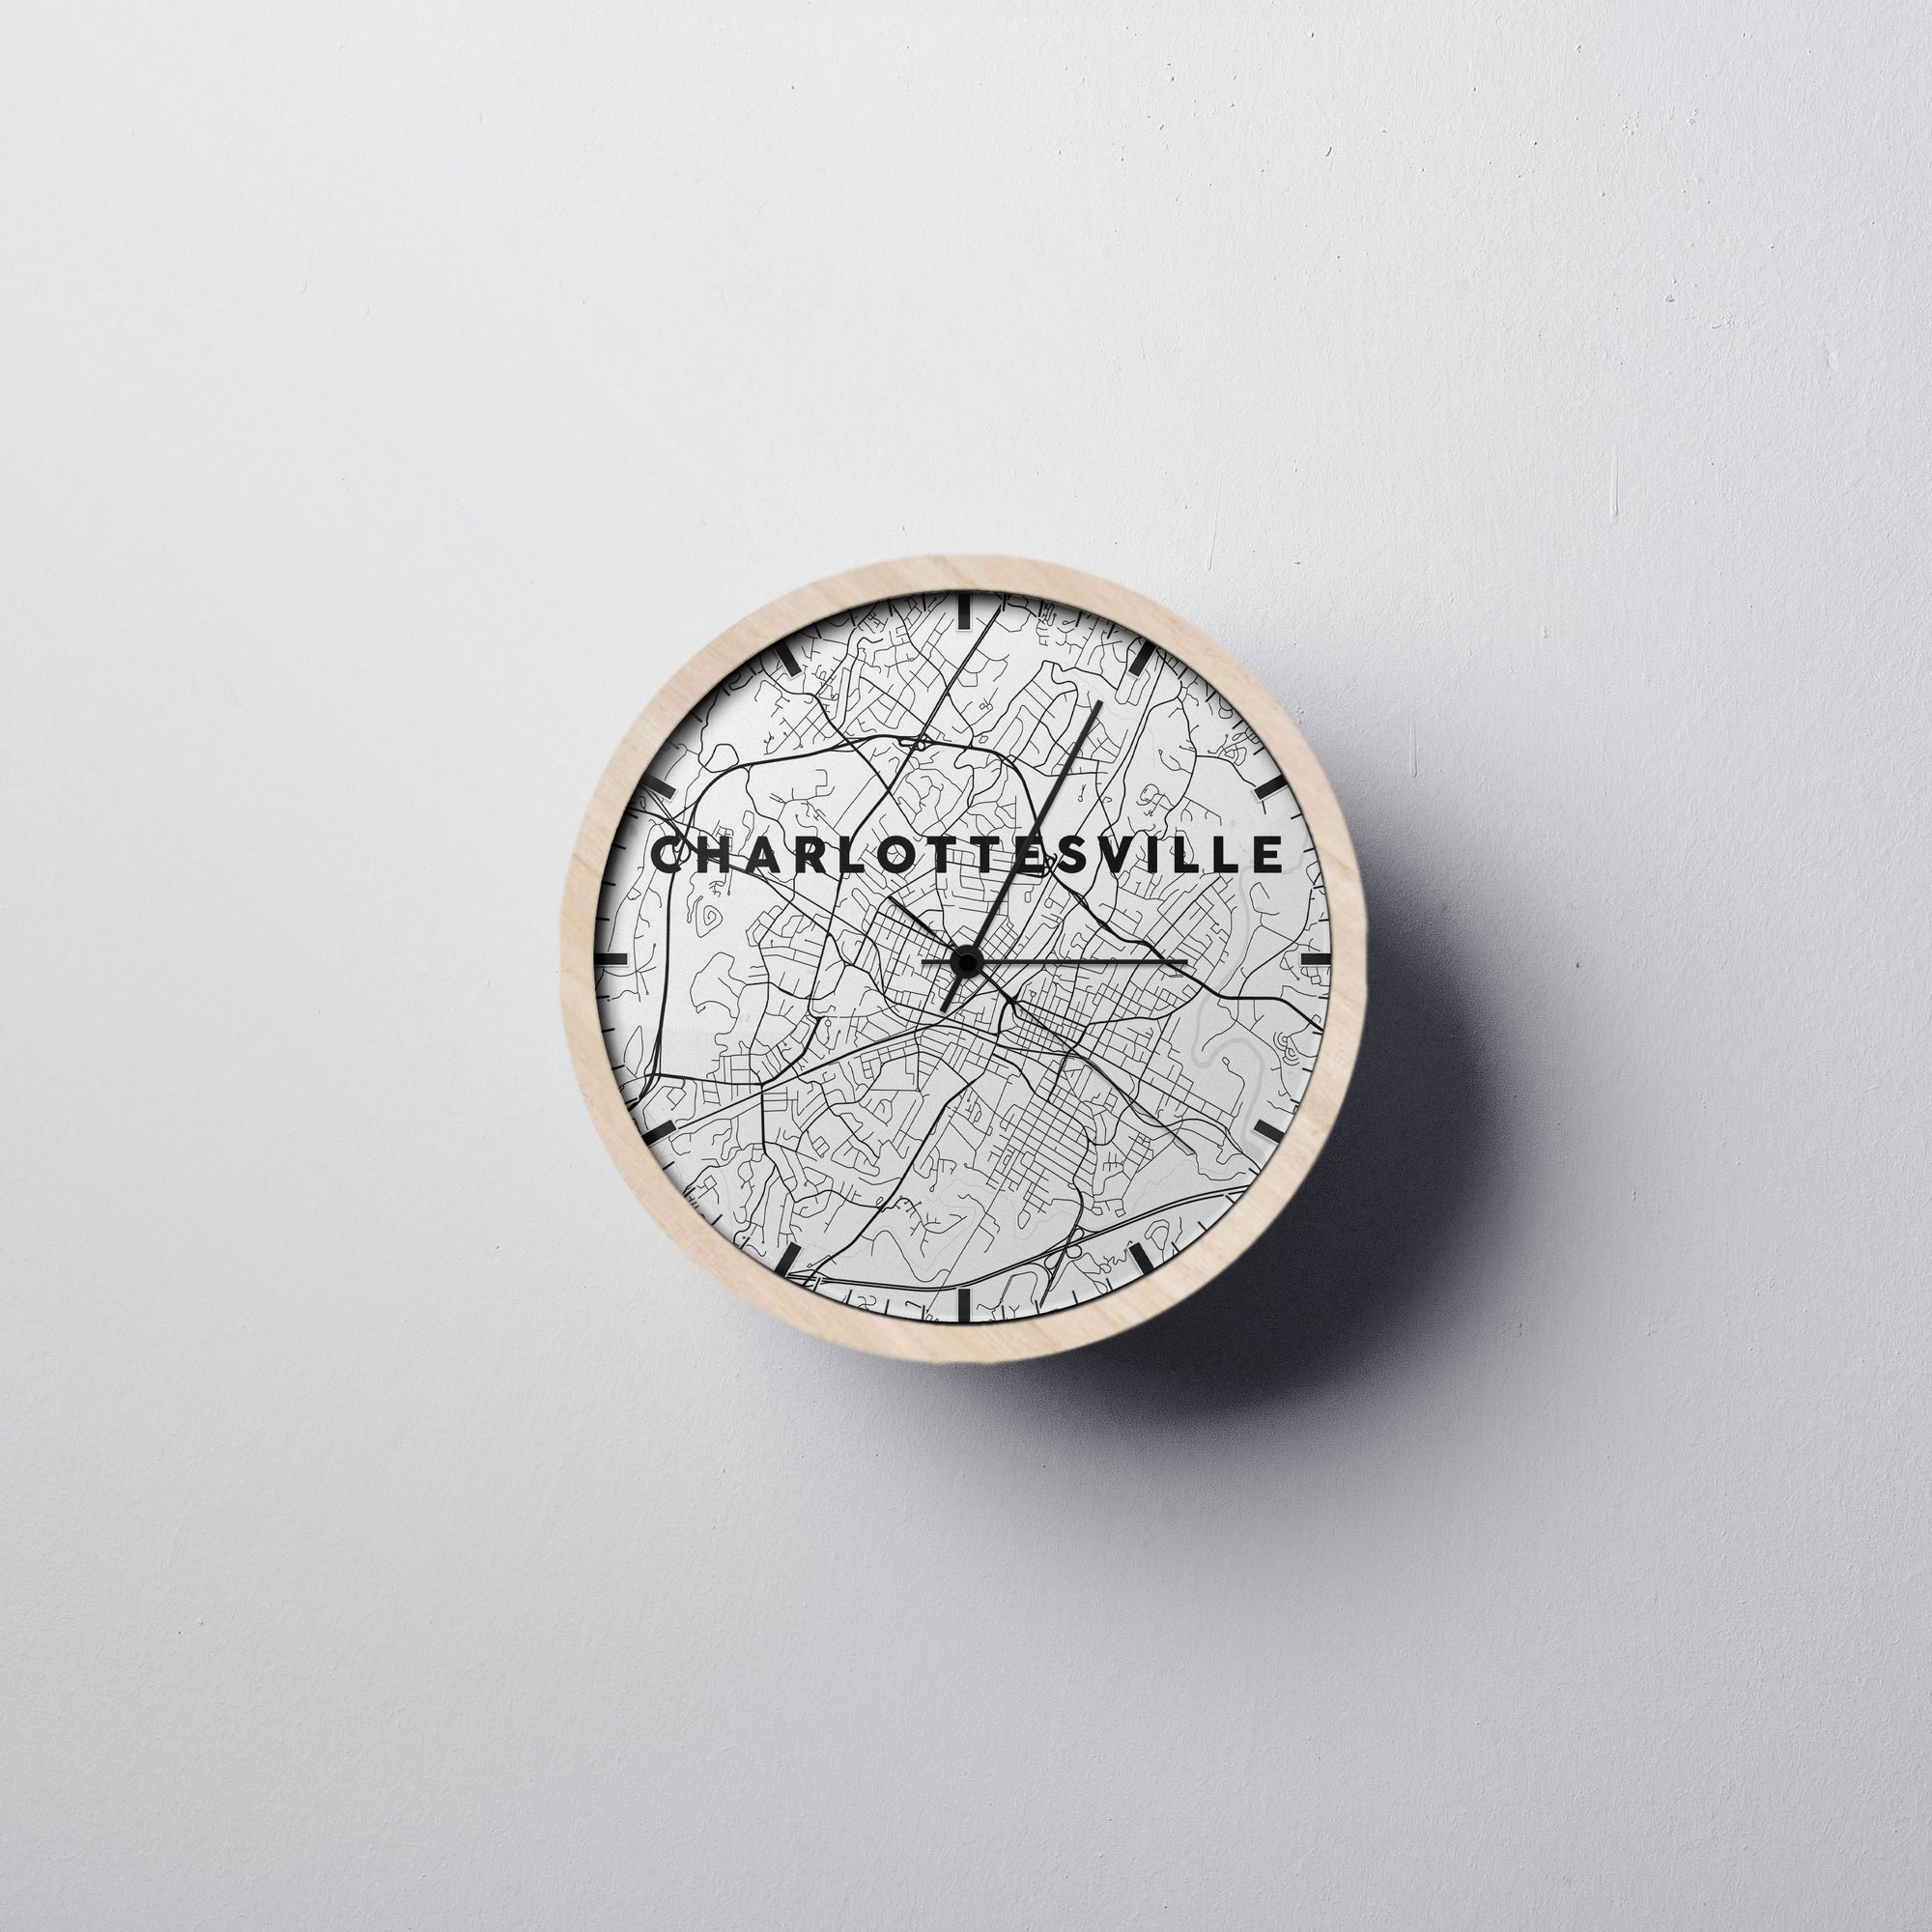 Charlottesville Wall Clock - Point Two Design